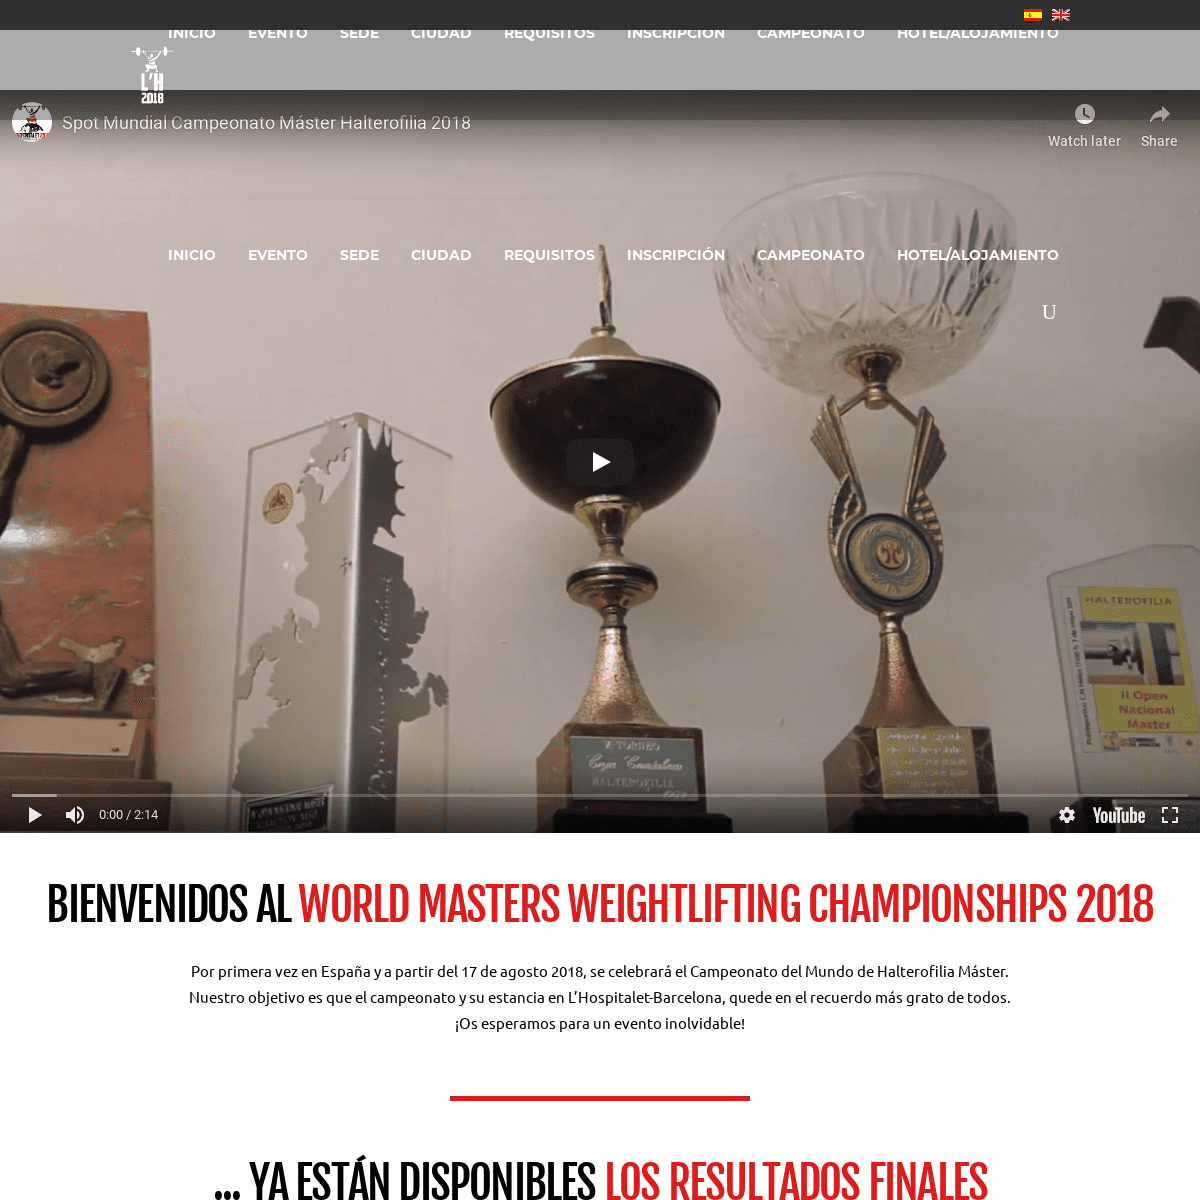 A complete backup of weightliftinglh2018.com